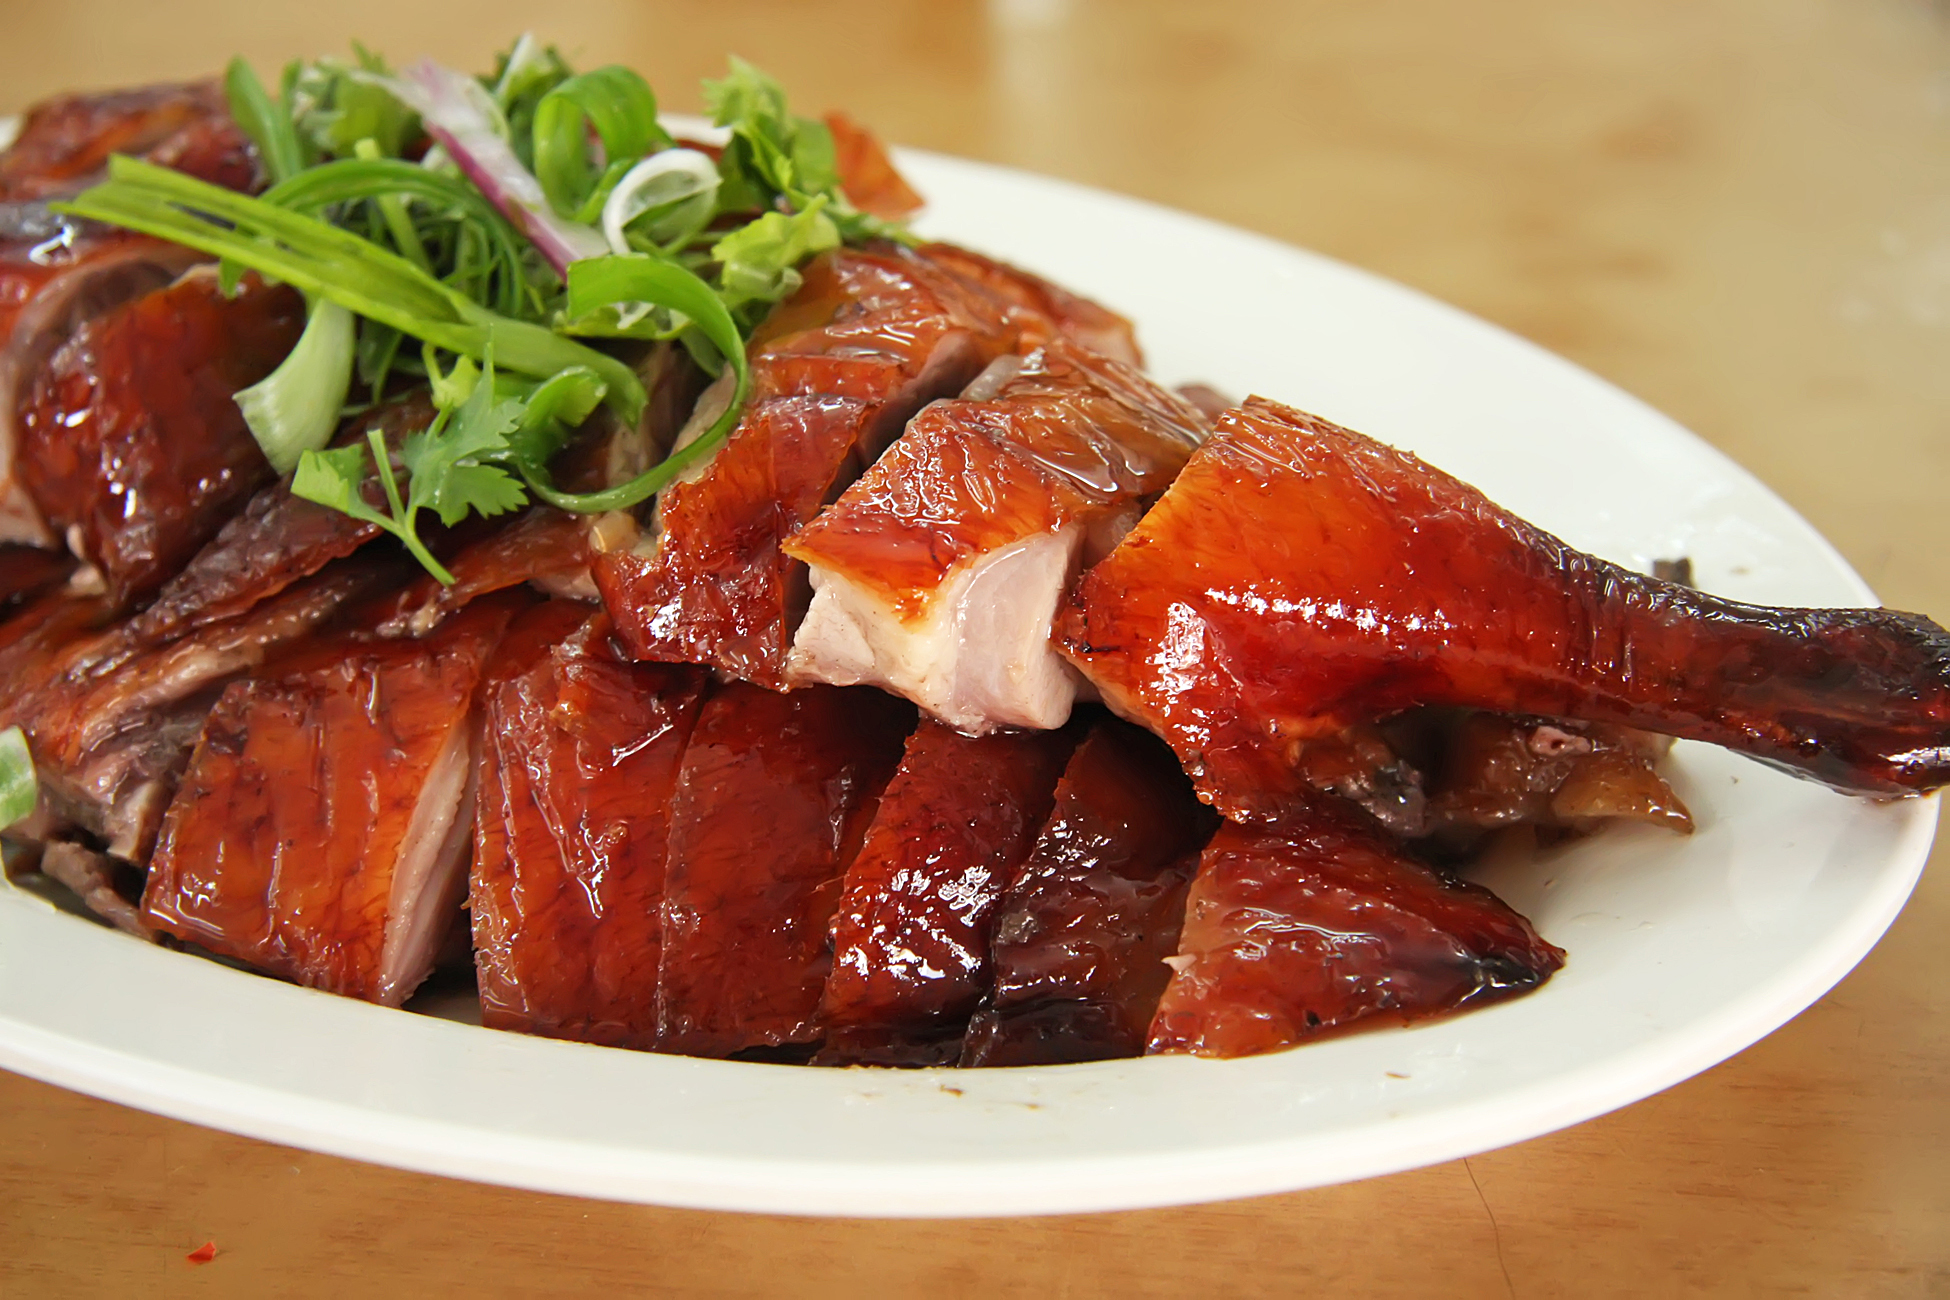 A plate with a whole, sliced crispy Chinese roast duck